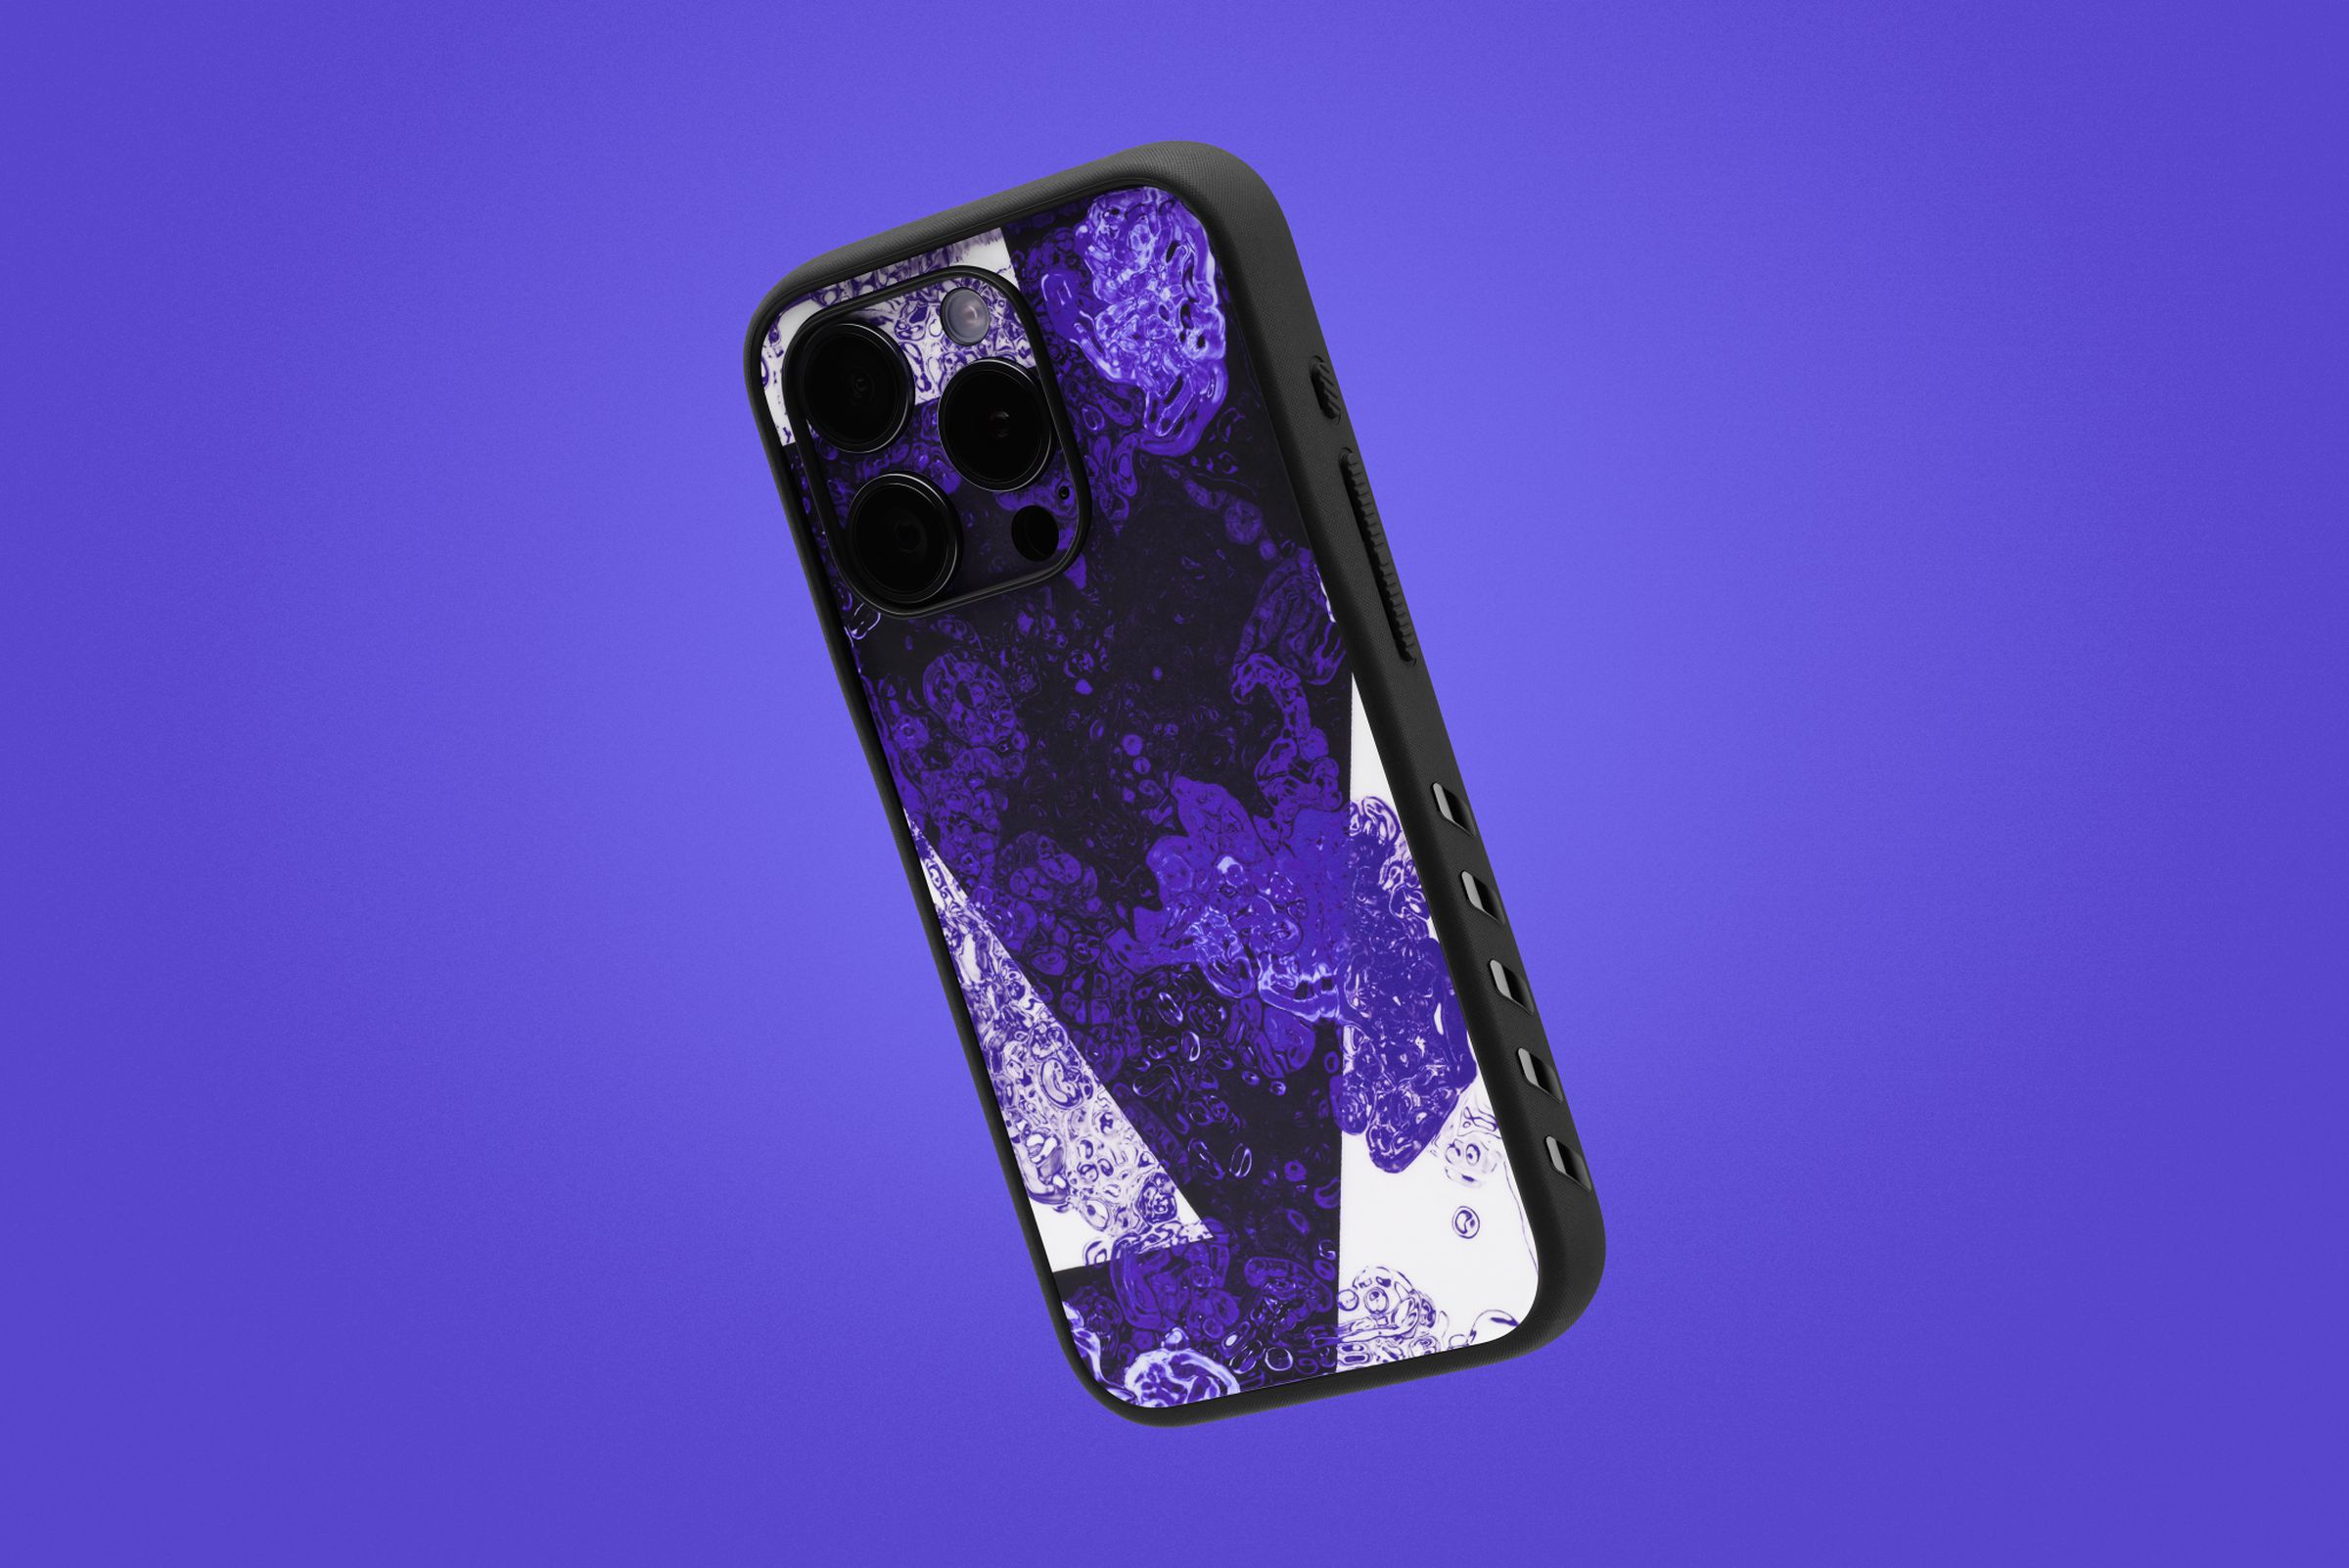 iPhone with dbrand Grip case and Monogram skin